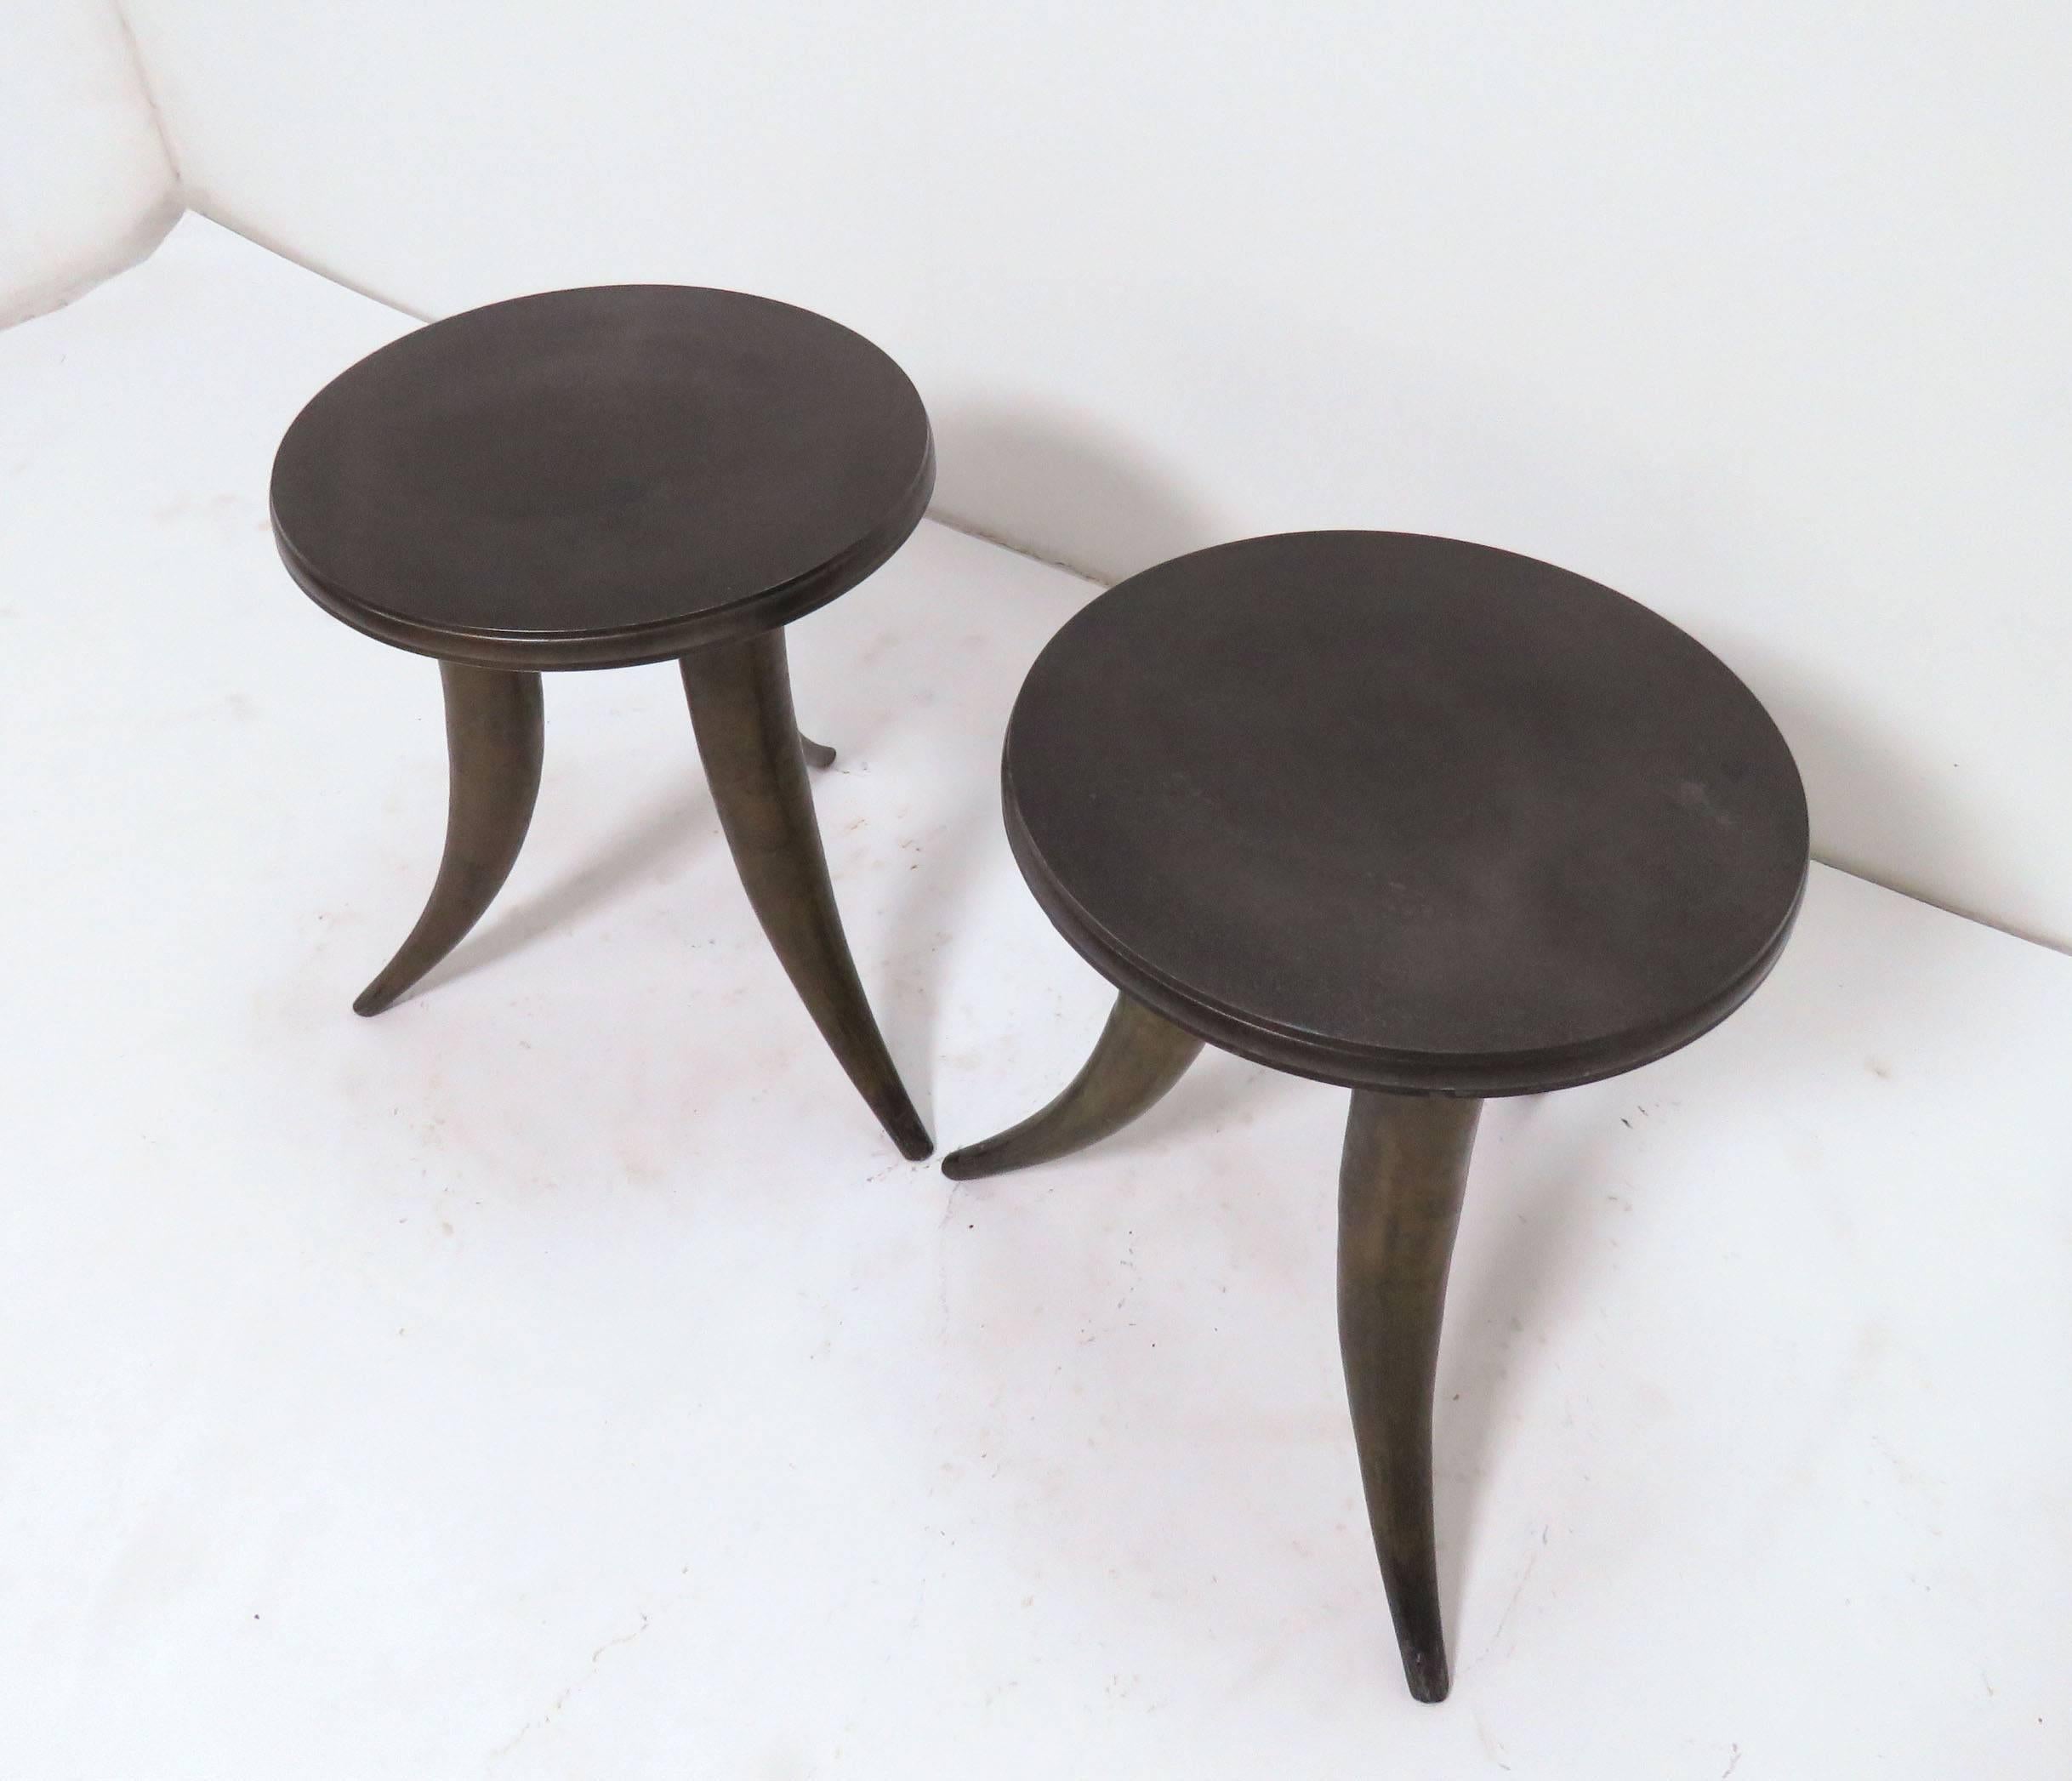 Mid-Century Modern Pair of Side Tables or Stools with Tusk Form Legs, circa 1960s